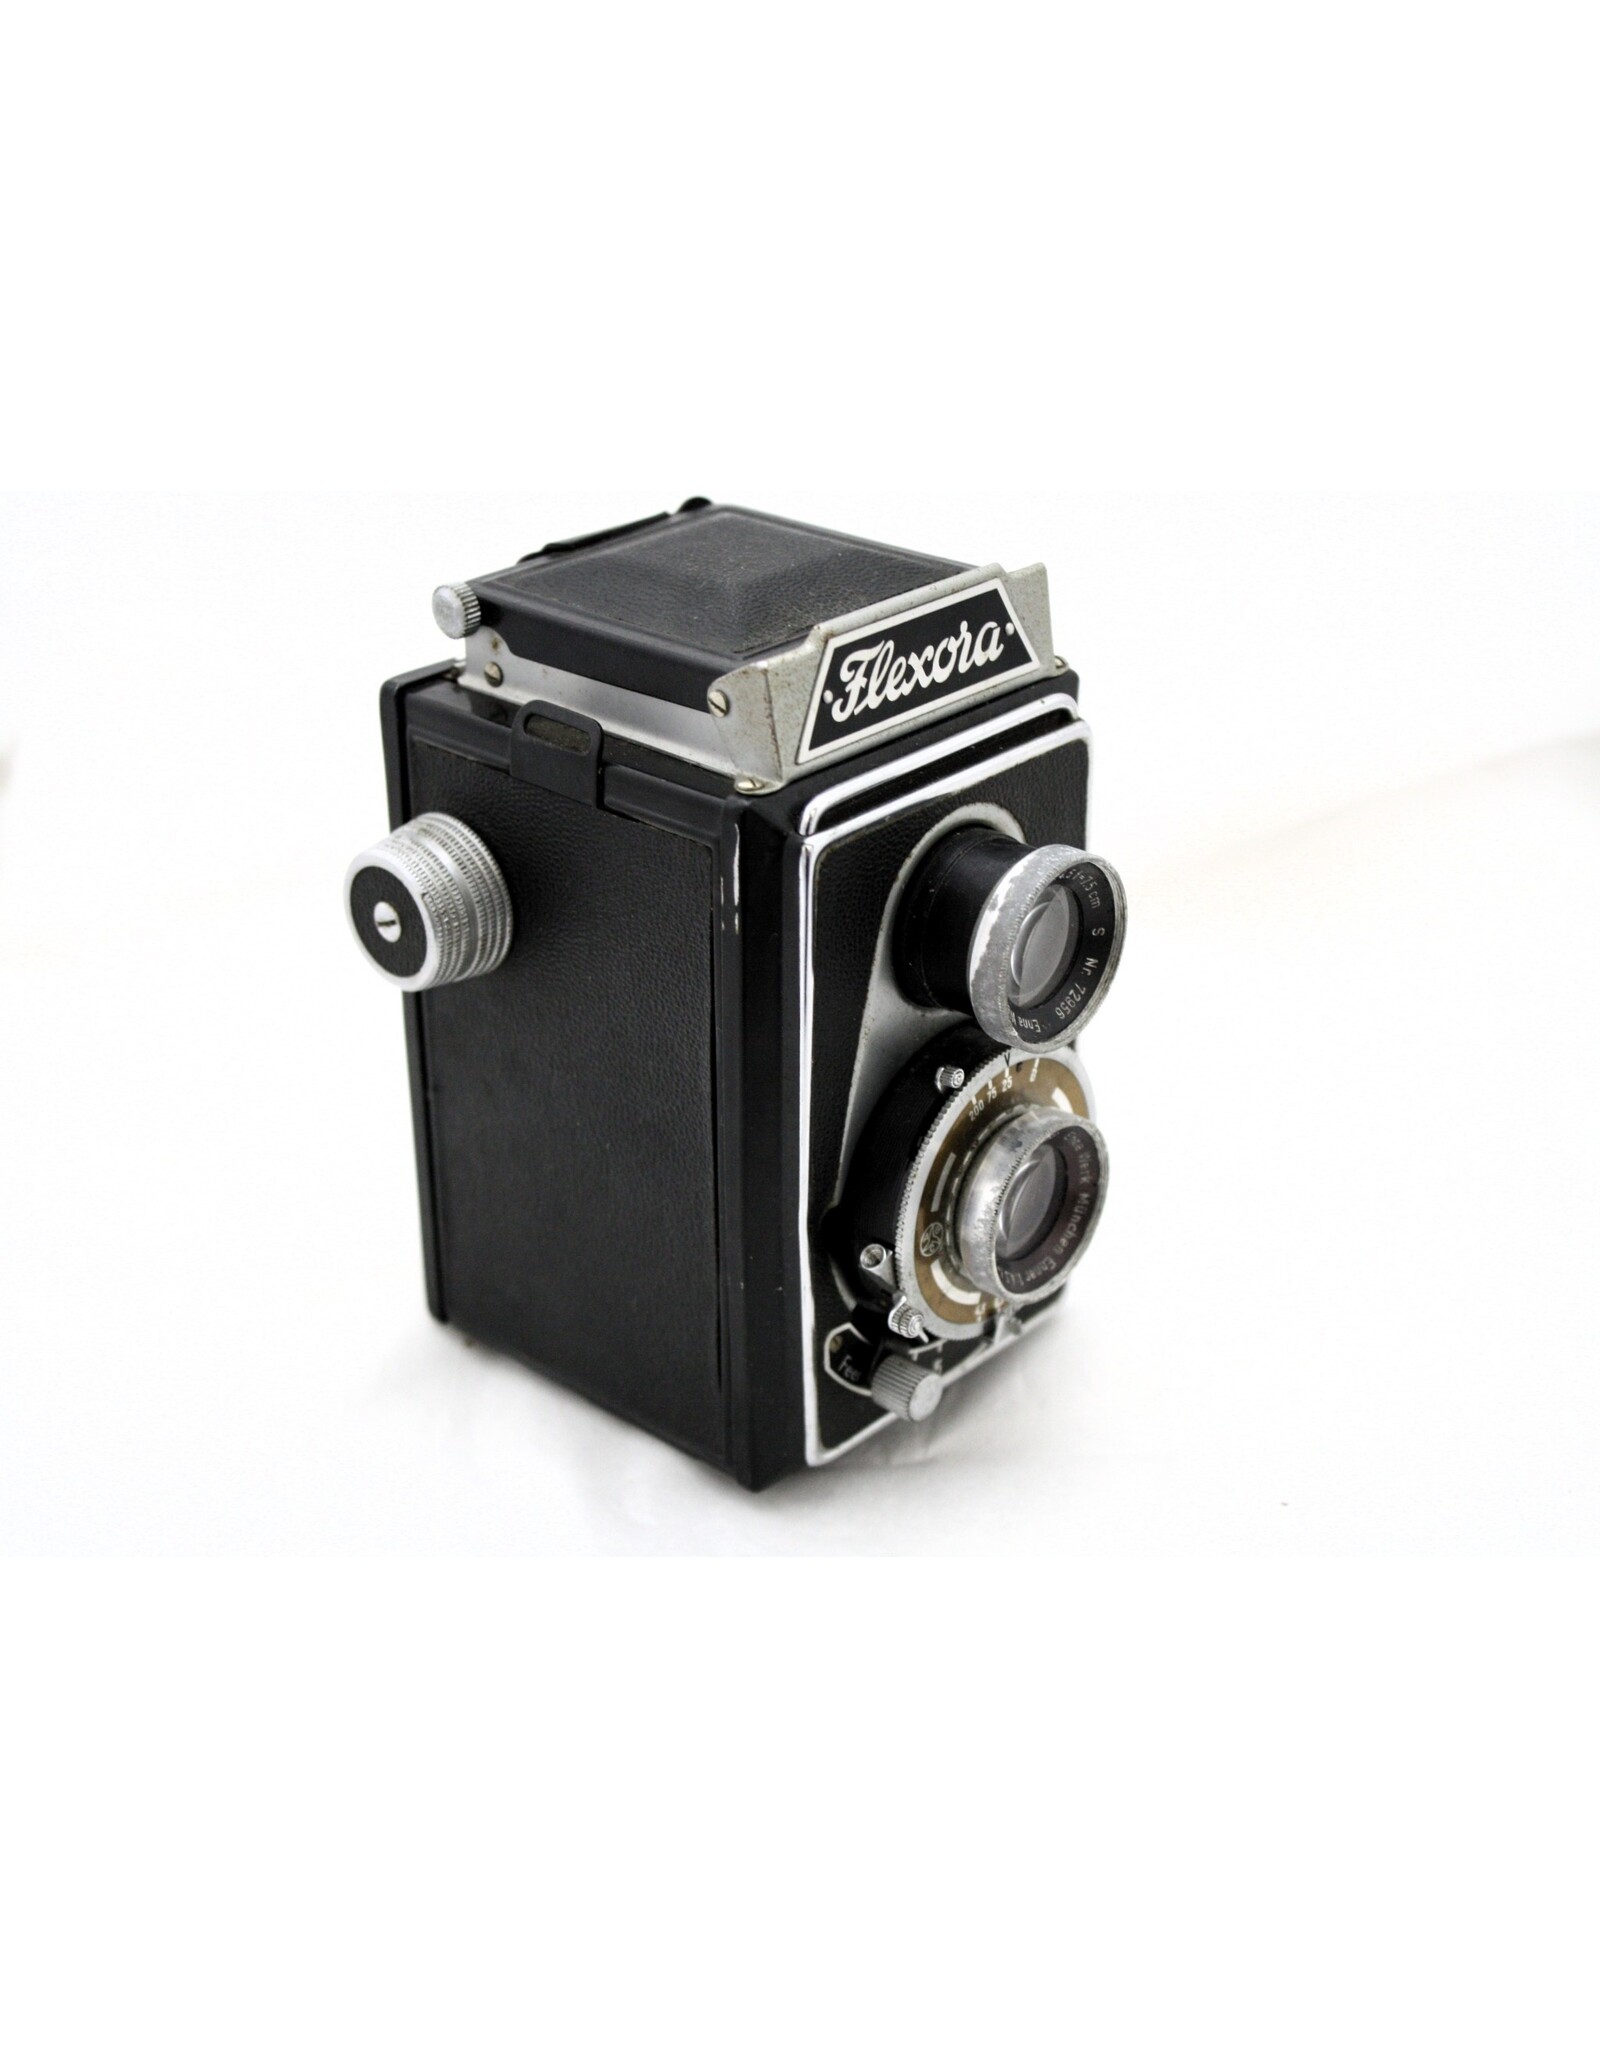 Lipca Flexora 2 1/4 x 2 1/4  TLR with Ennagon 3.5/7.5cm Lens and case (Pre-owned)